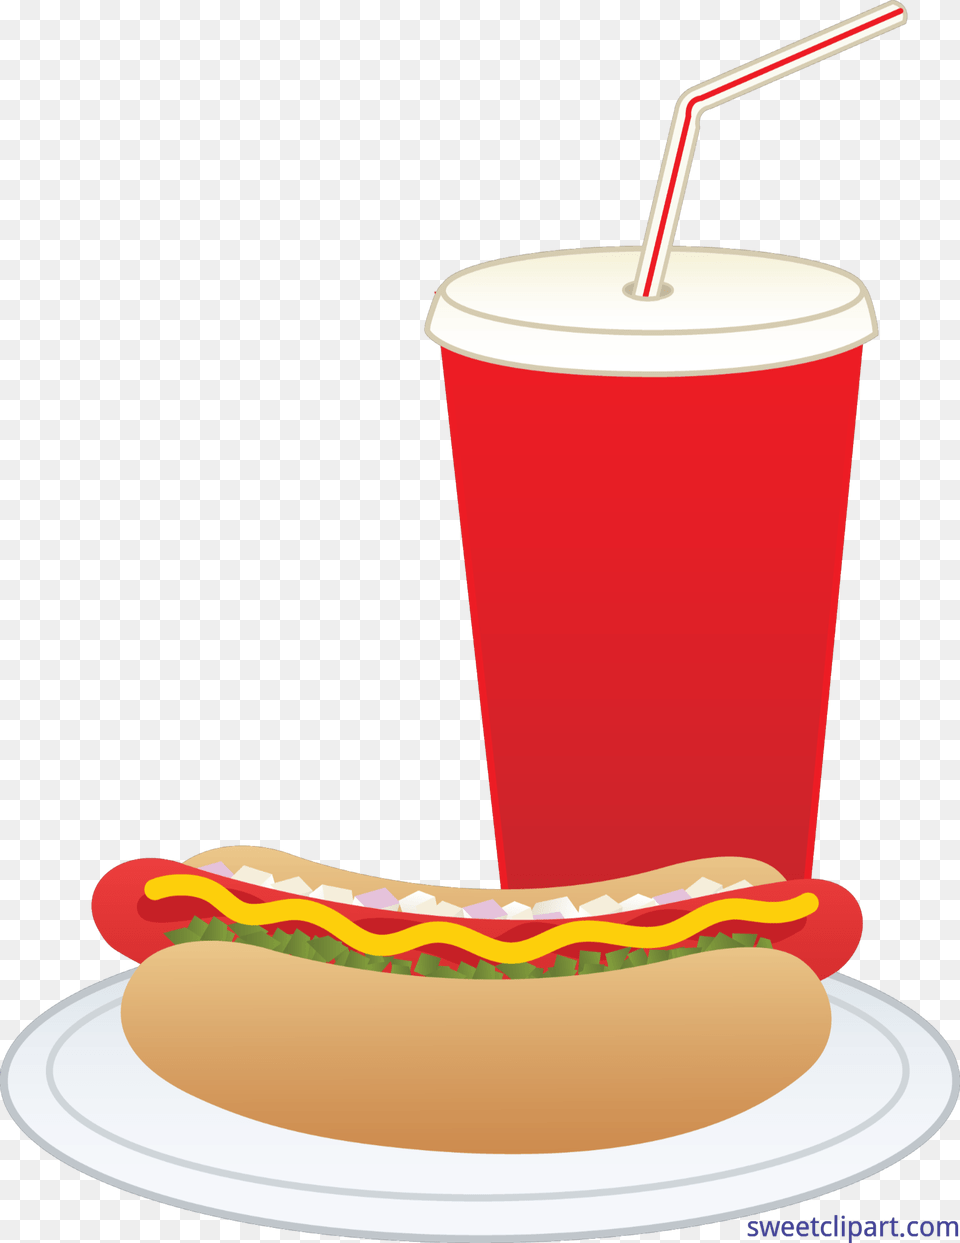 Hot Dog And Soda Clip Art Hot Dogs And Soda, Food, Hot Dog Free Transparent Png